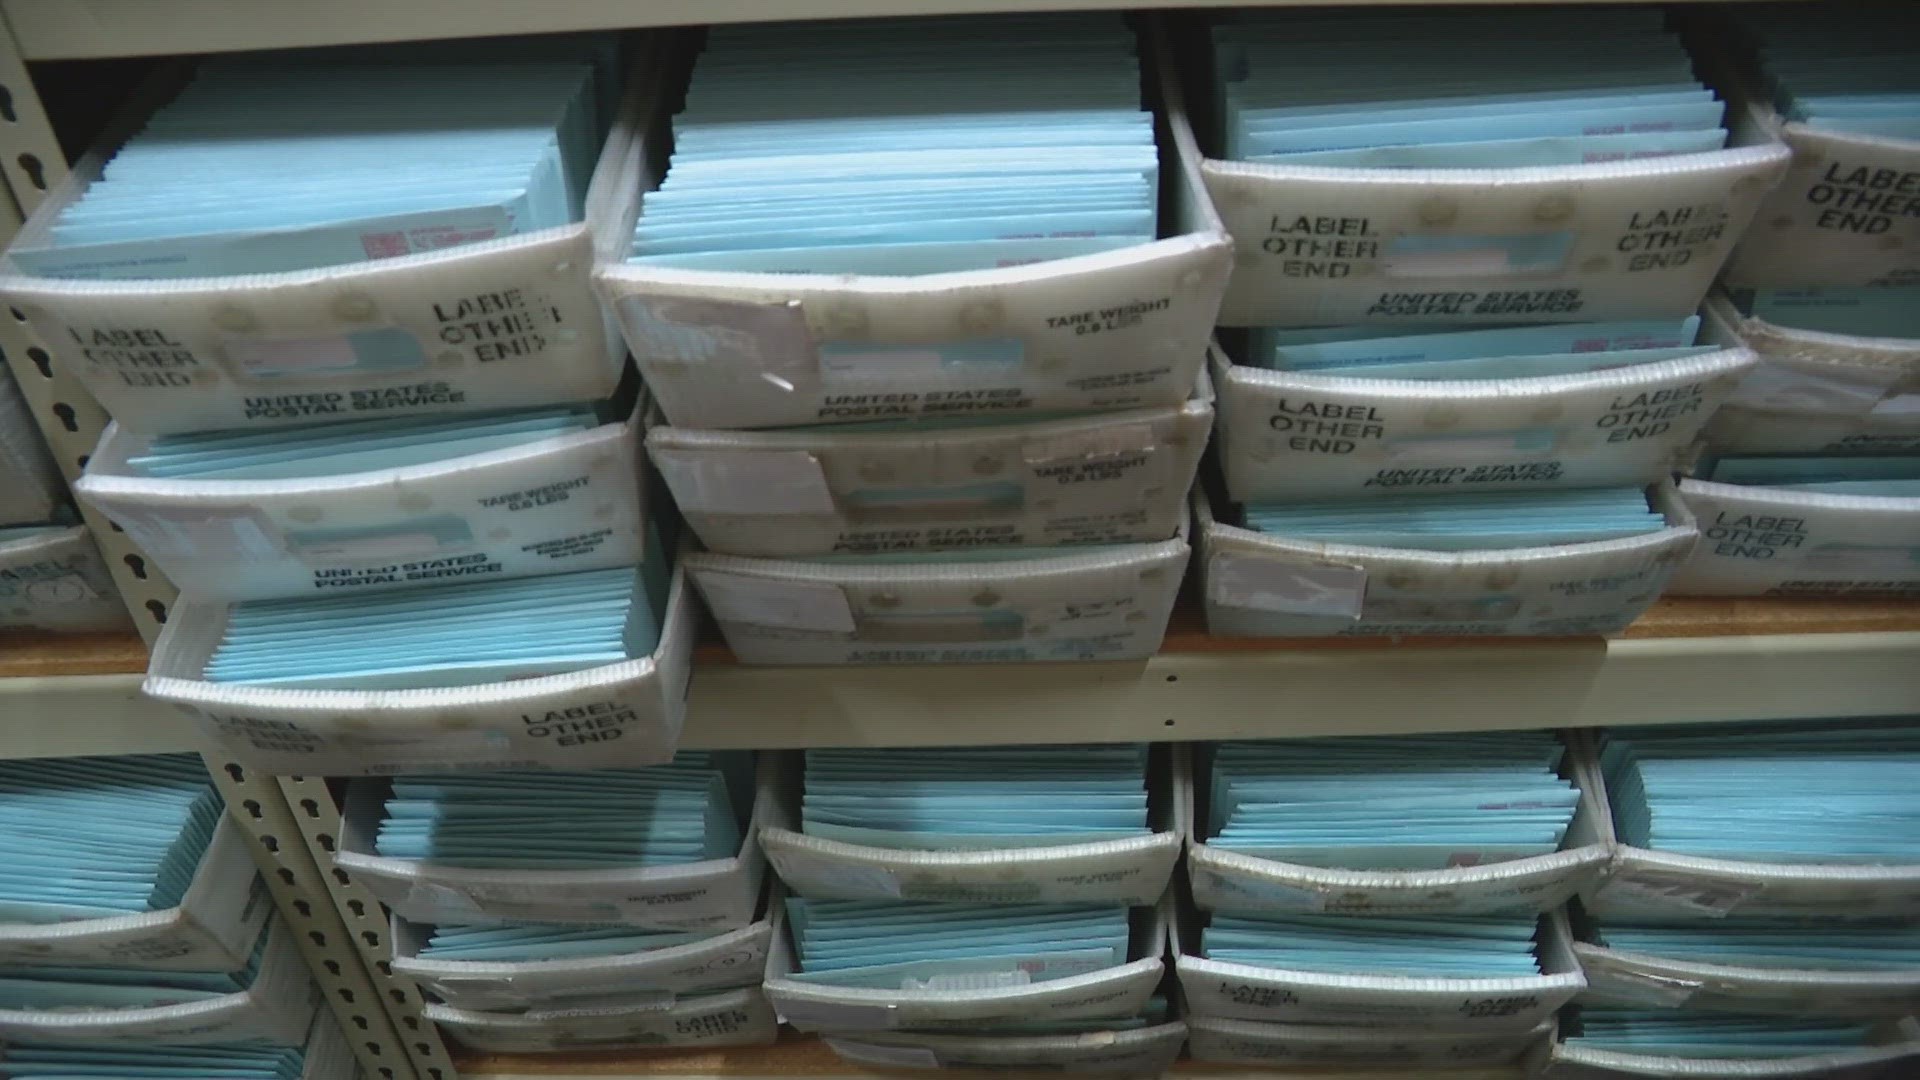 Thousands of blue envelopes hit the mail Tuesday as IMS officially started sending out tickets to this year's Indianapolis 500.